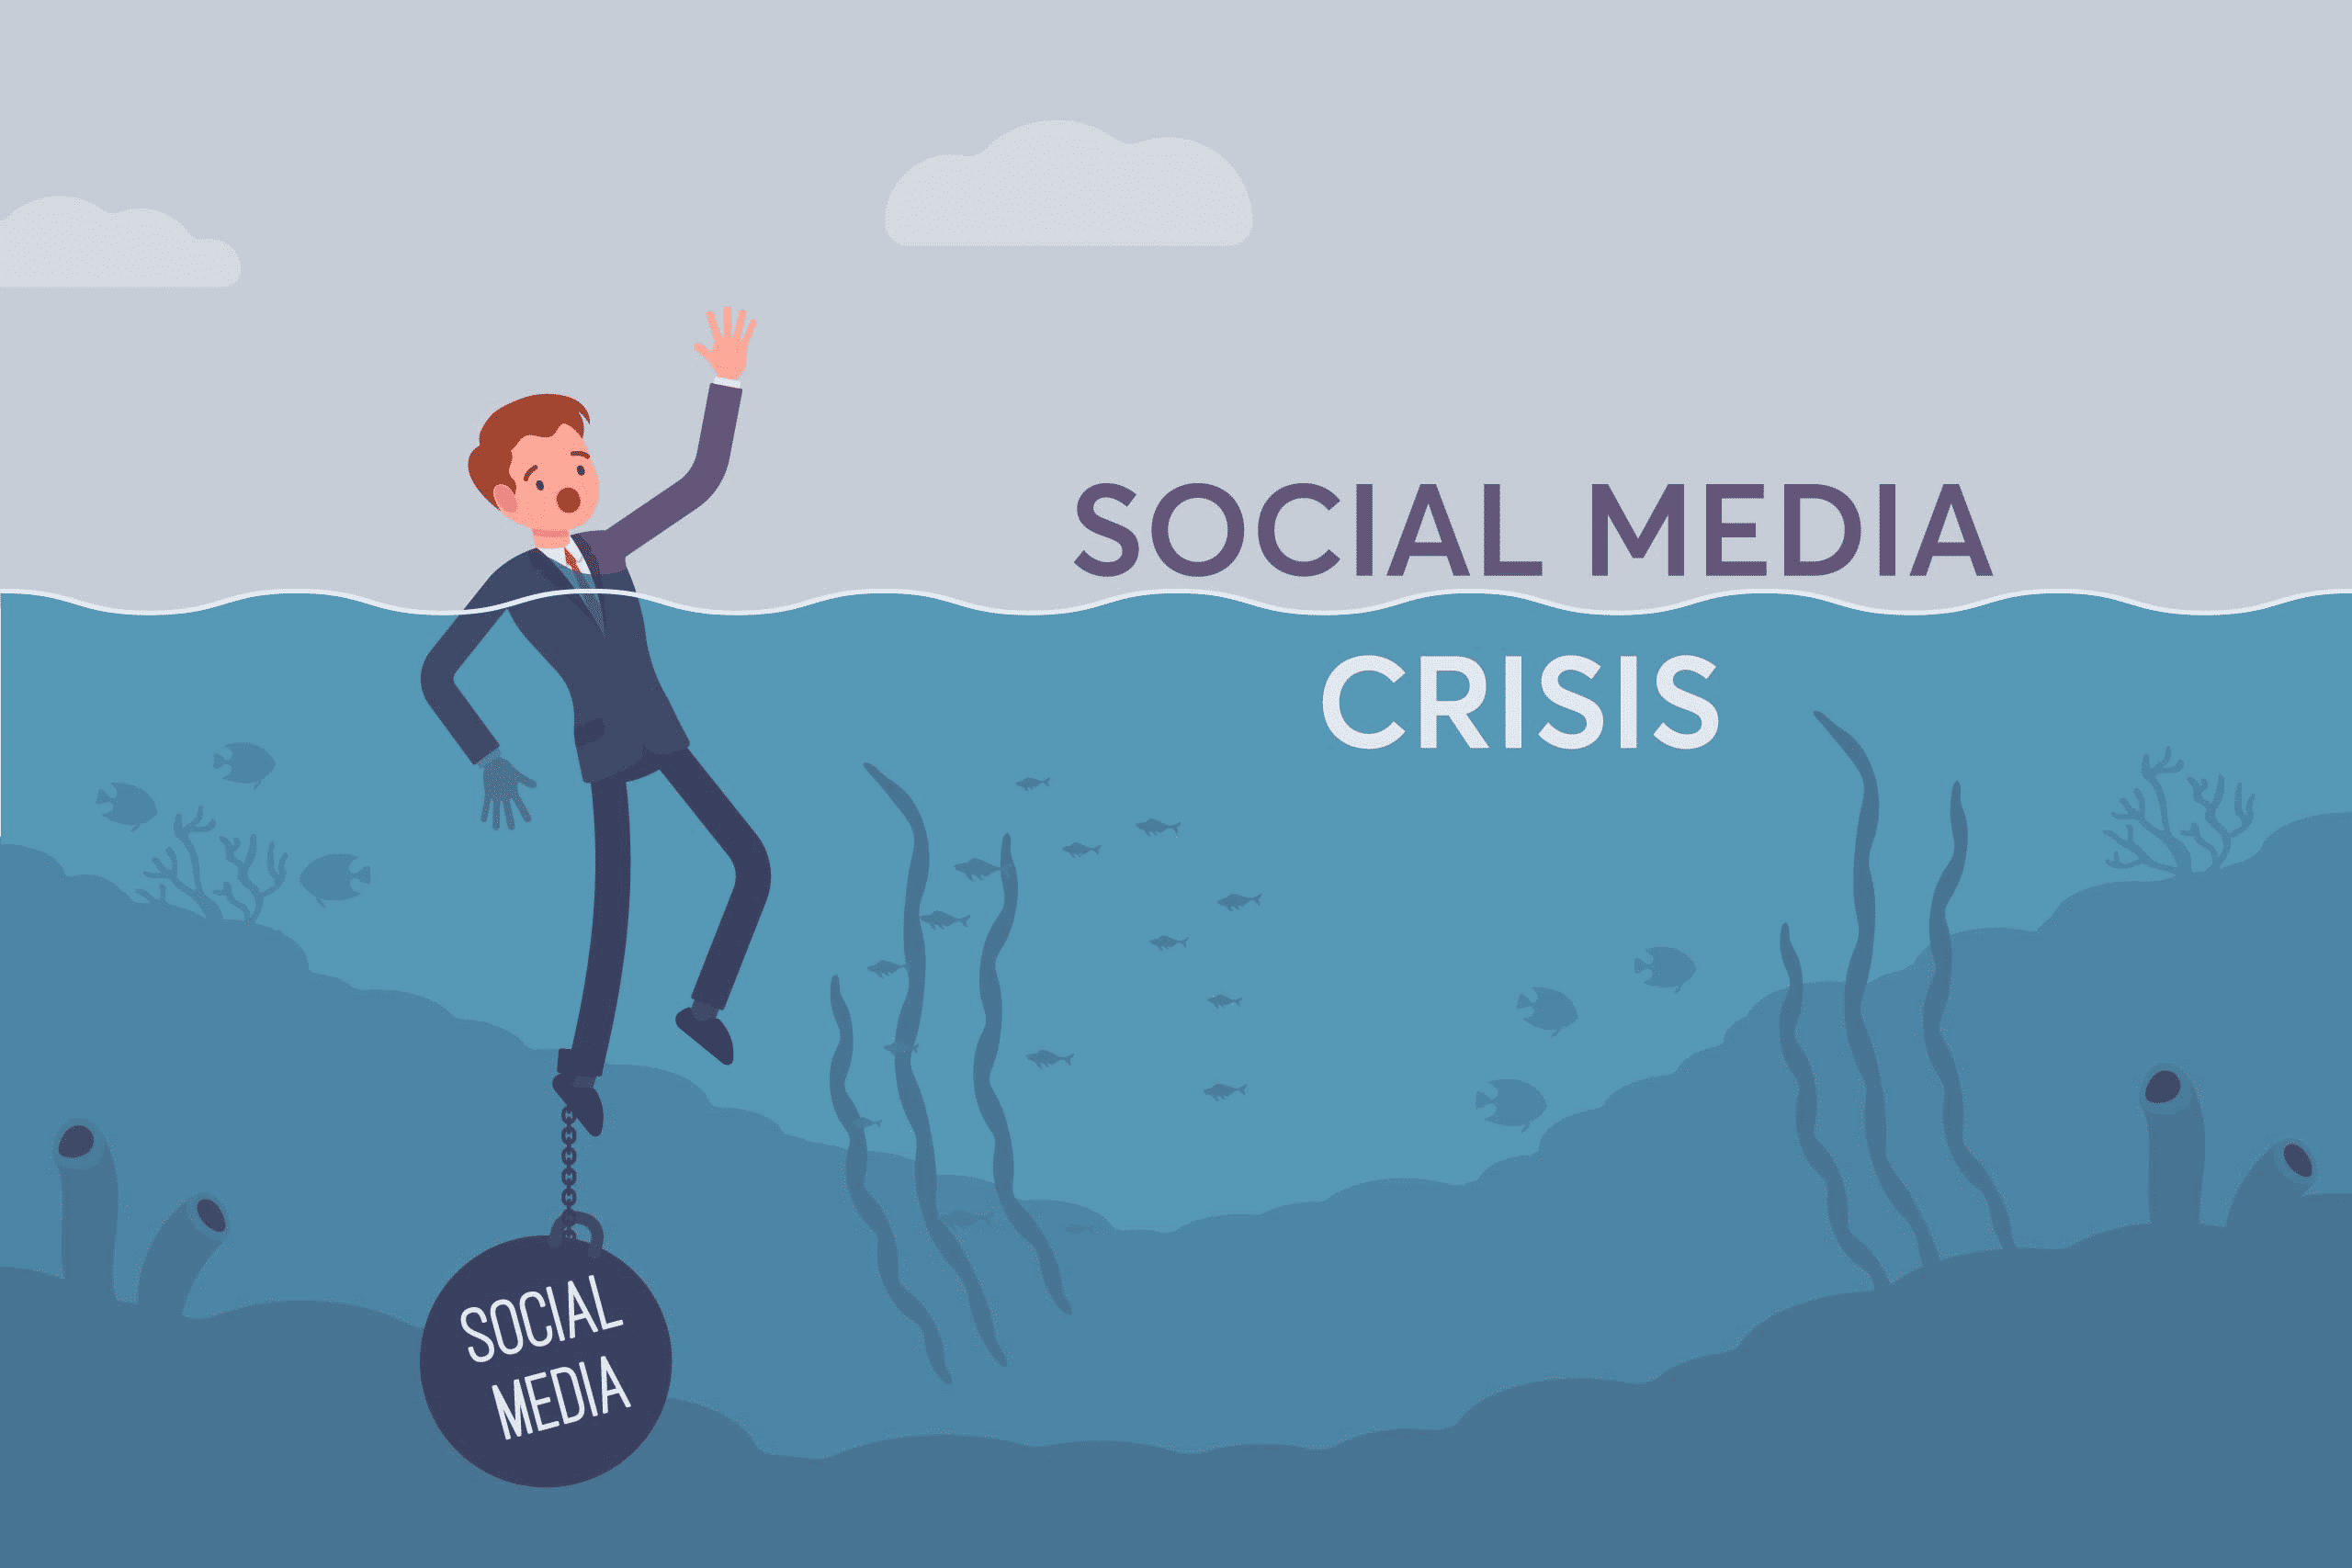 Art illustration depicting an employee burdened by a heavy ball, symbolizing social media crisis management.